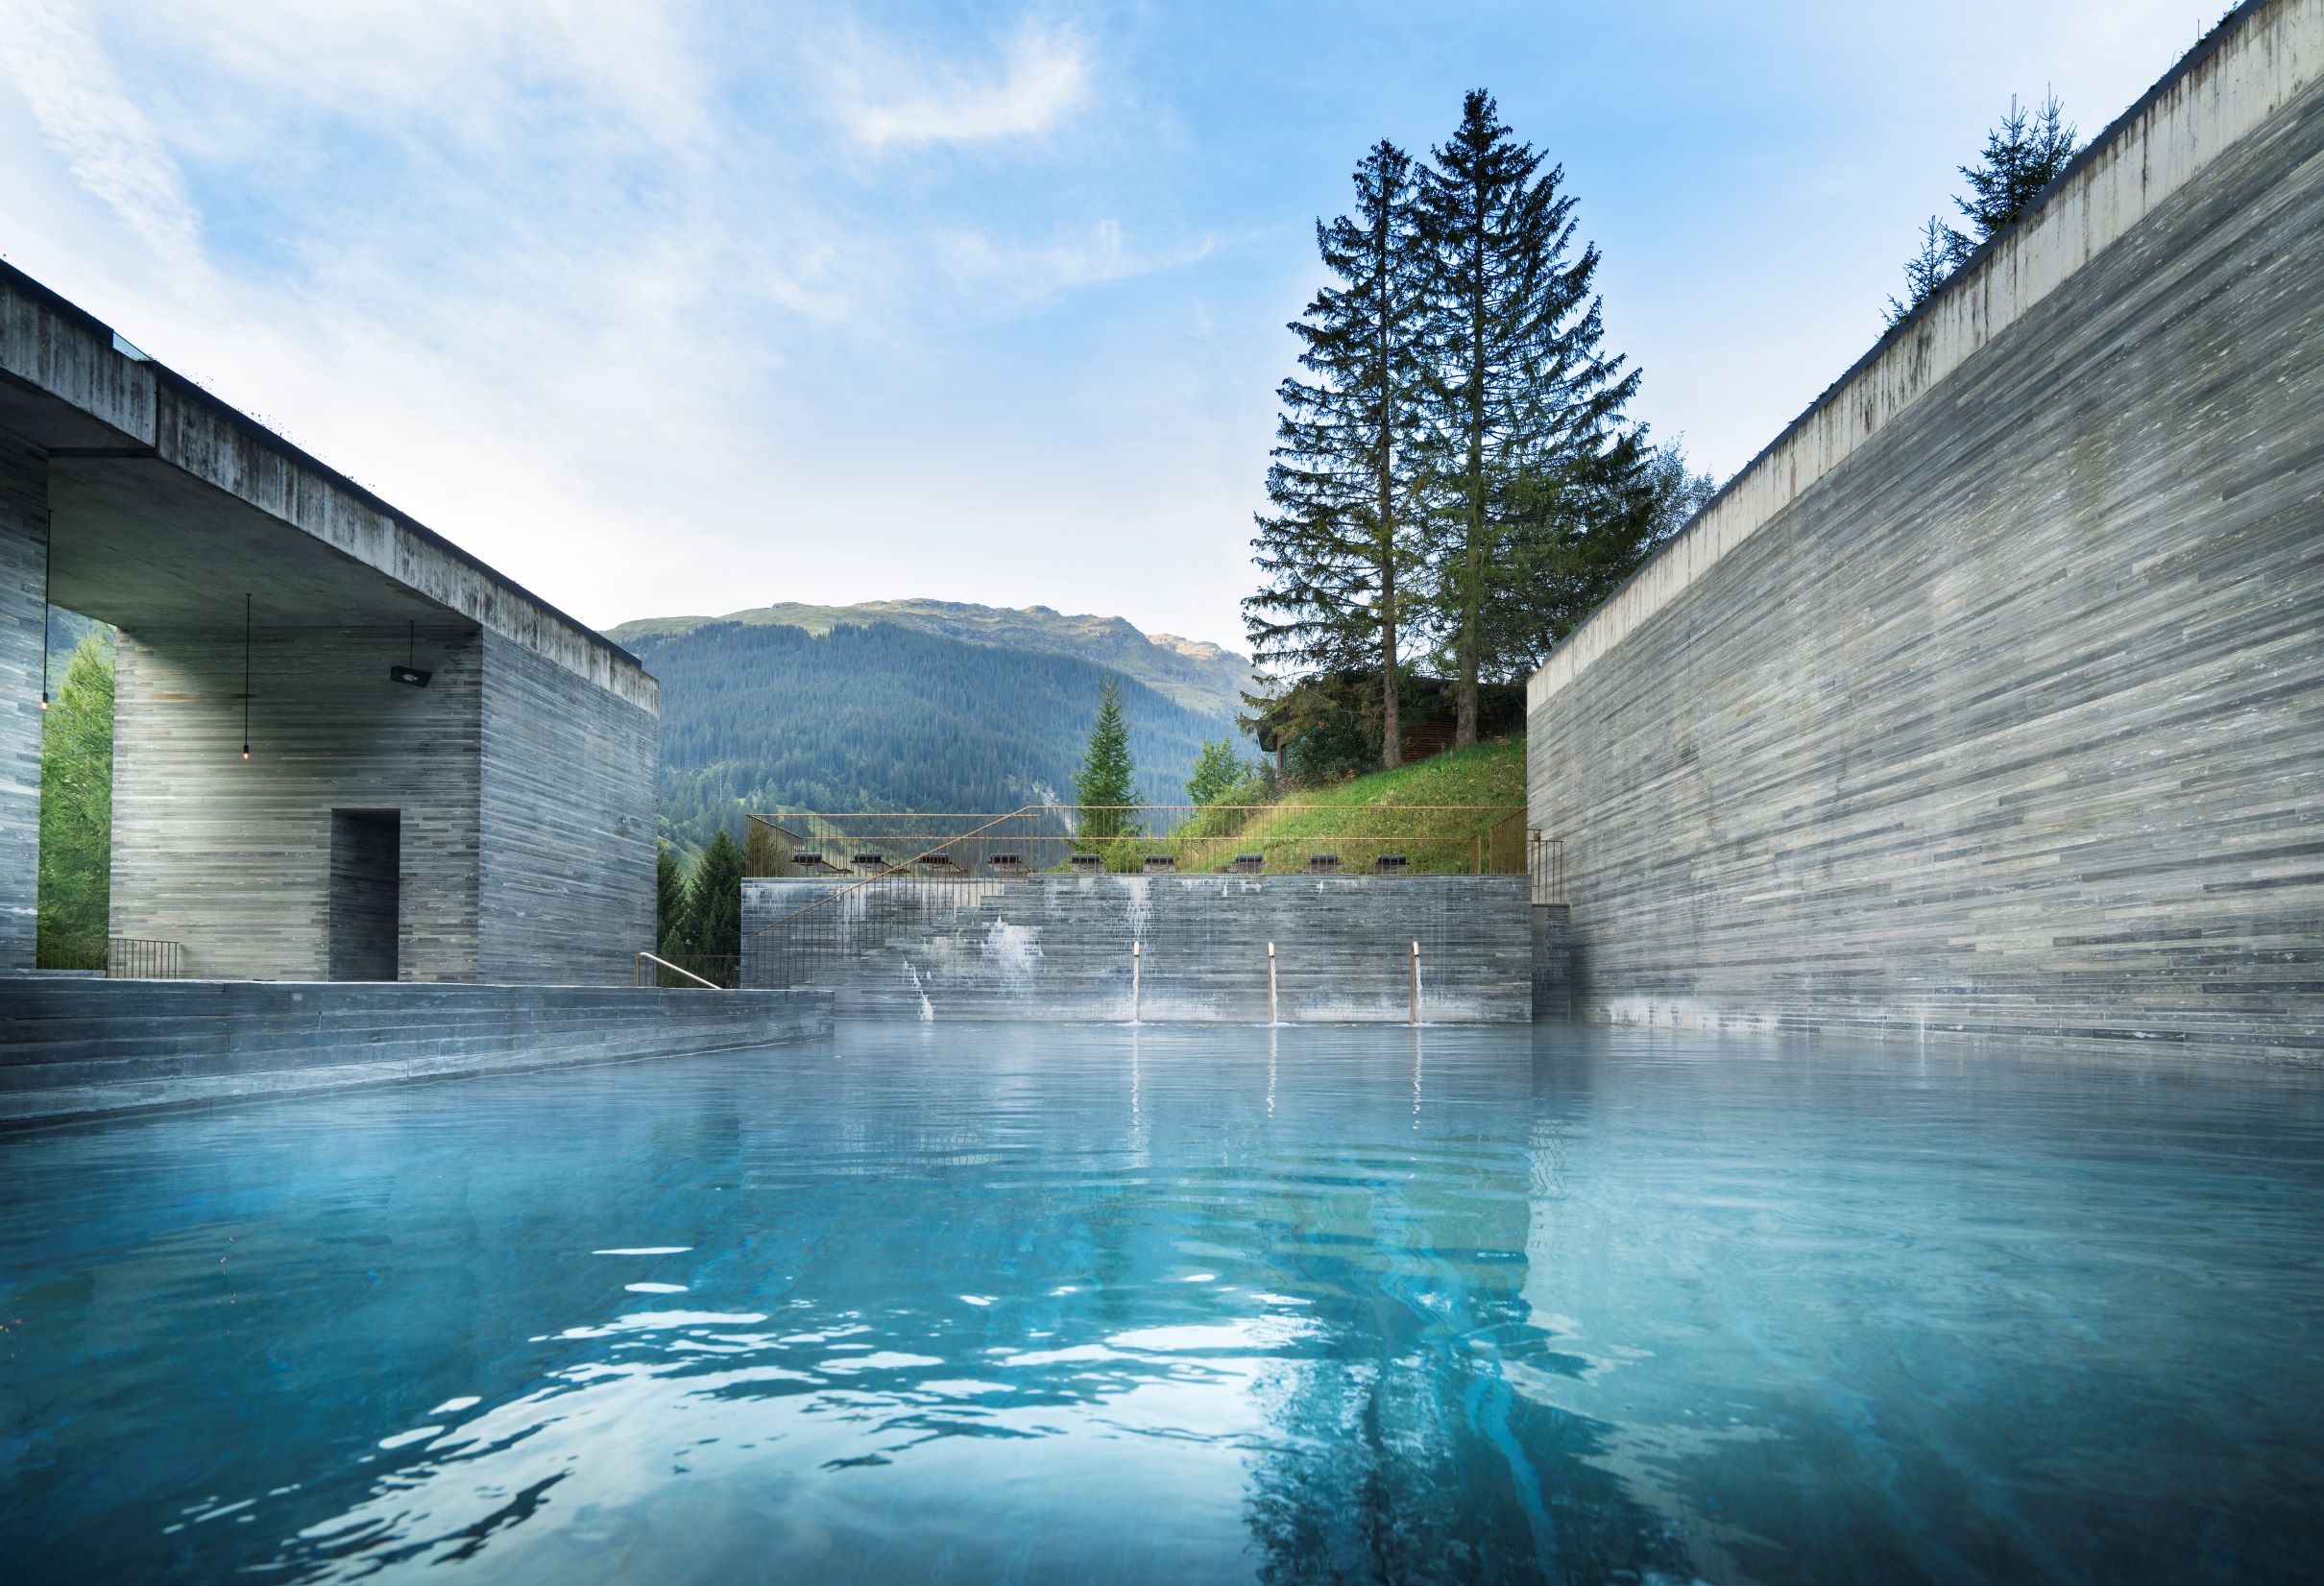 7132 Thermal Baths (formerly Therme Vals), 7132 Hotel, Vals, Switzerland